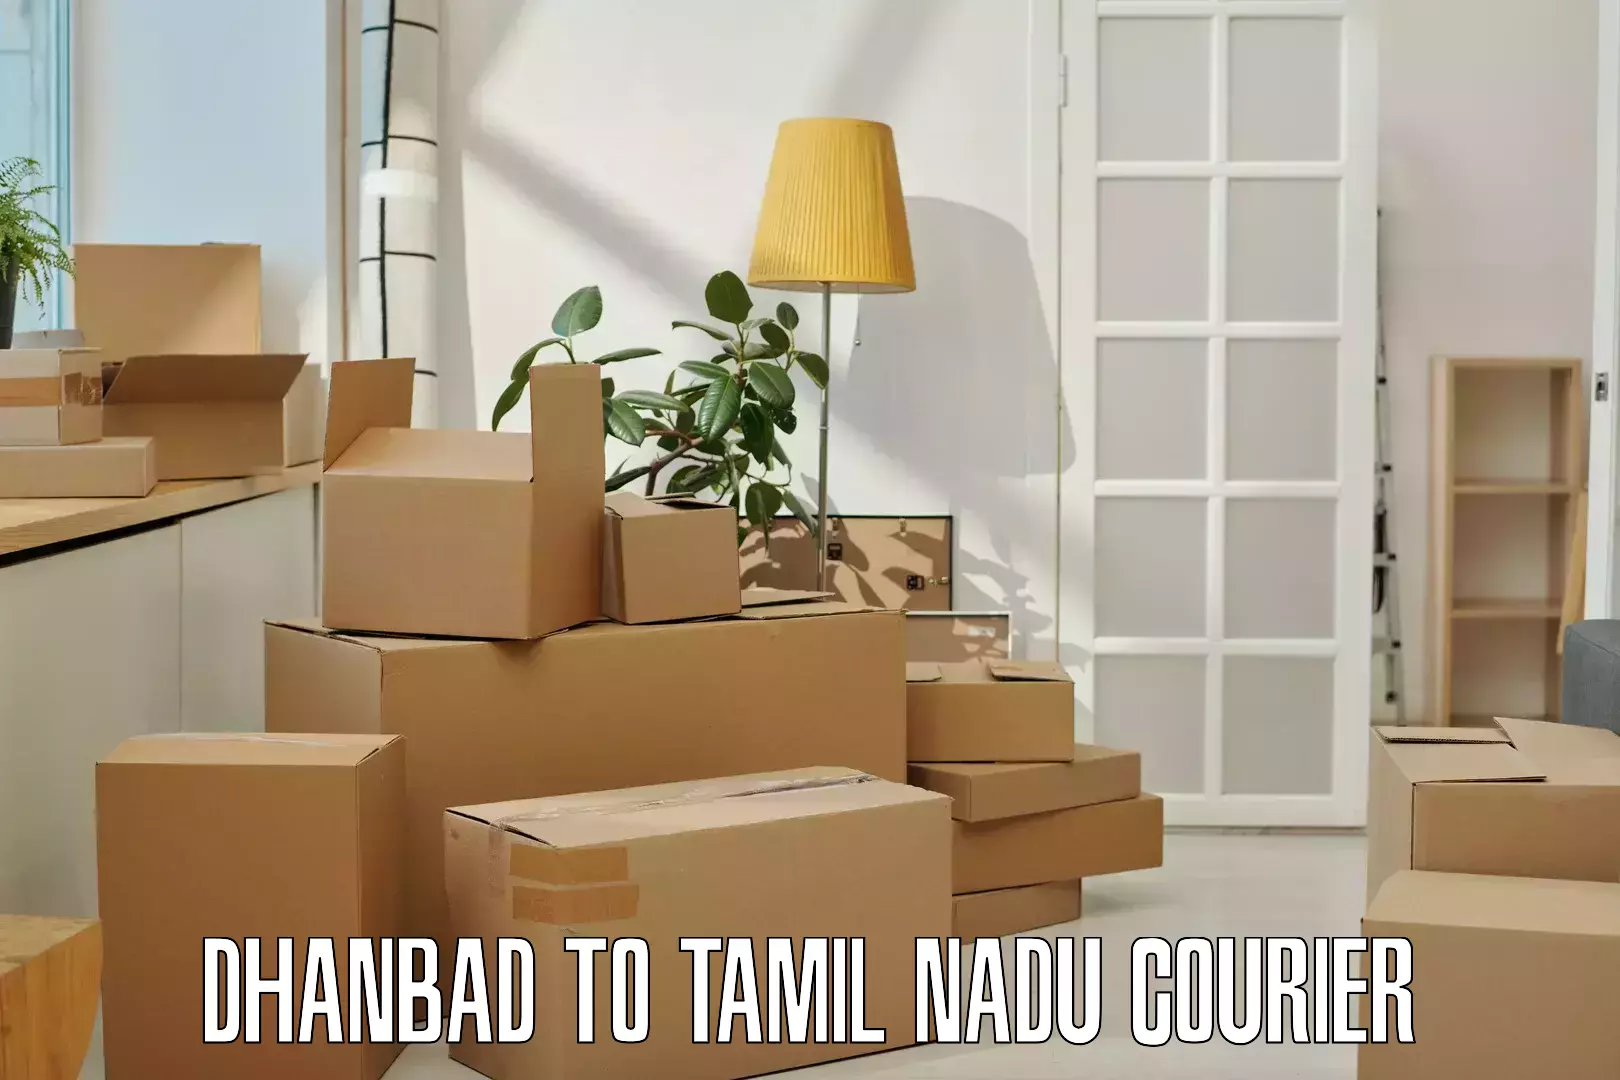 Nationwide delivery network Dhanbad to Aruppukkottai